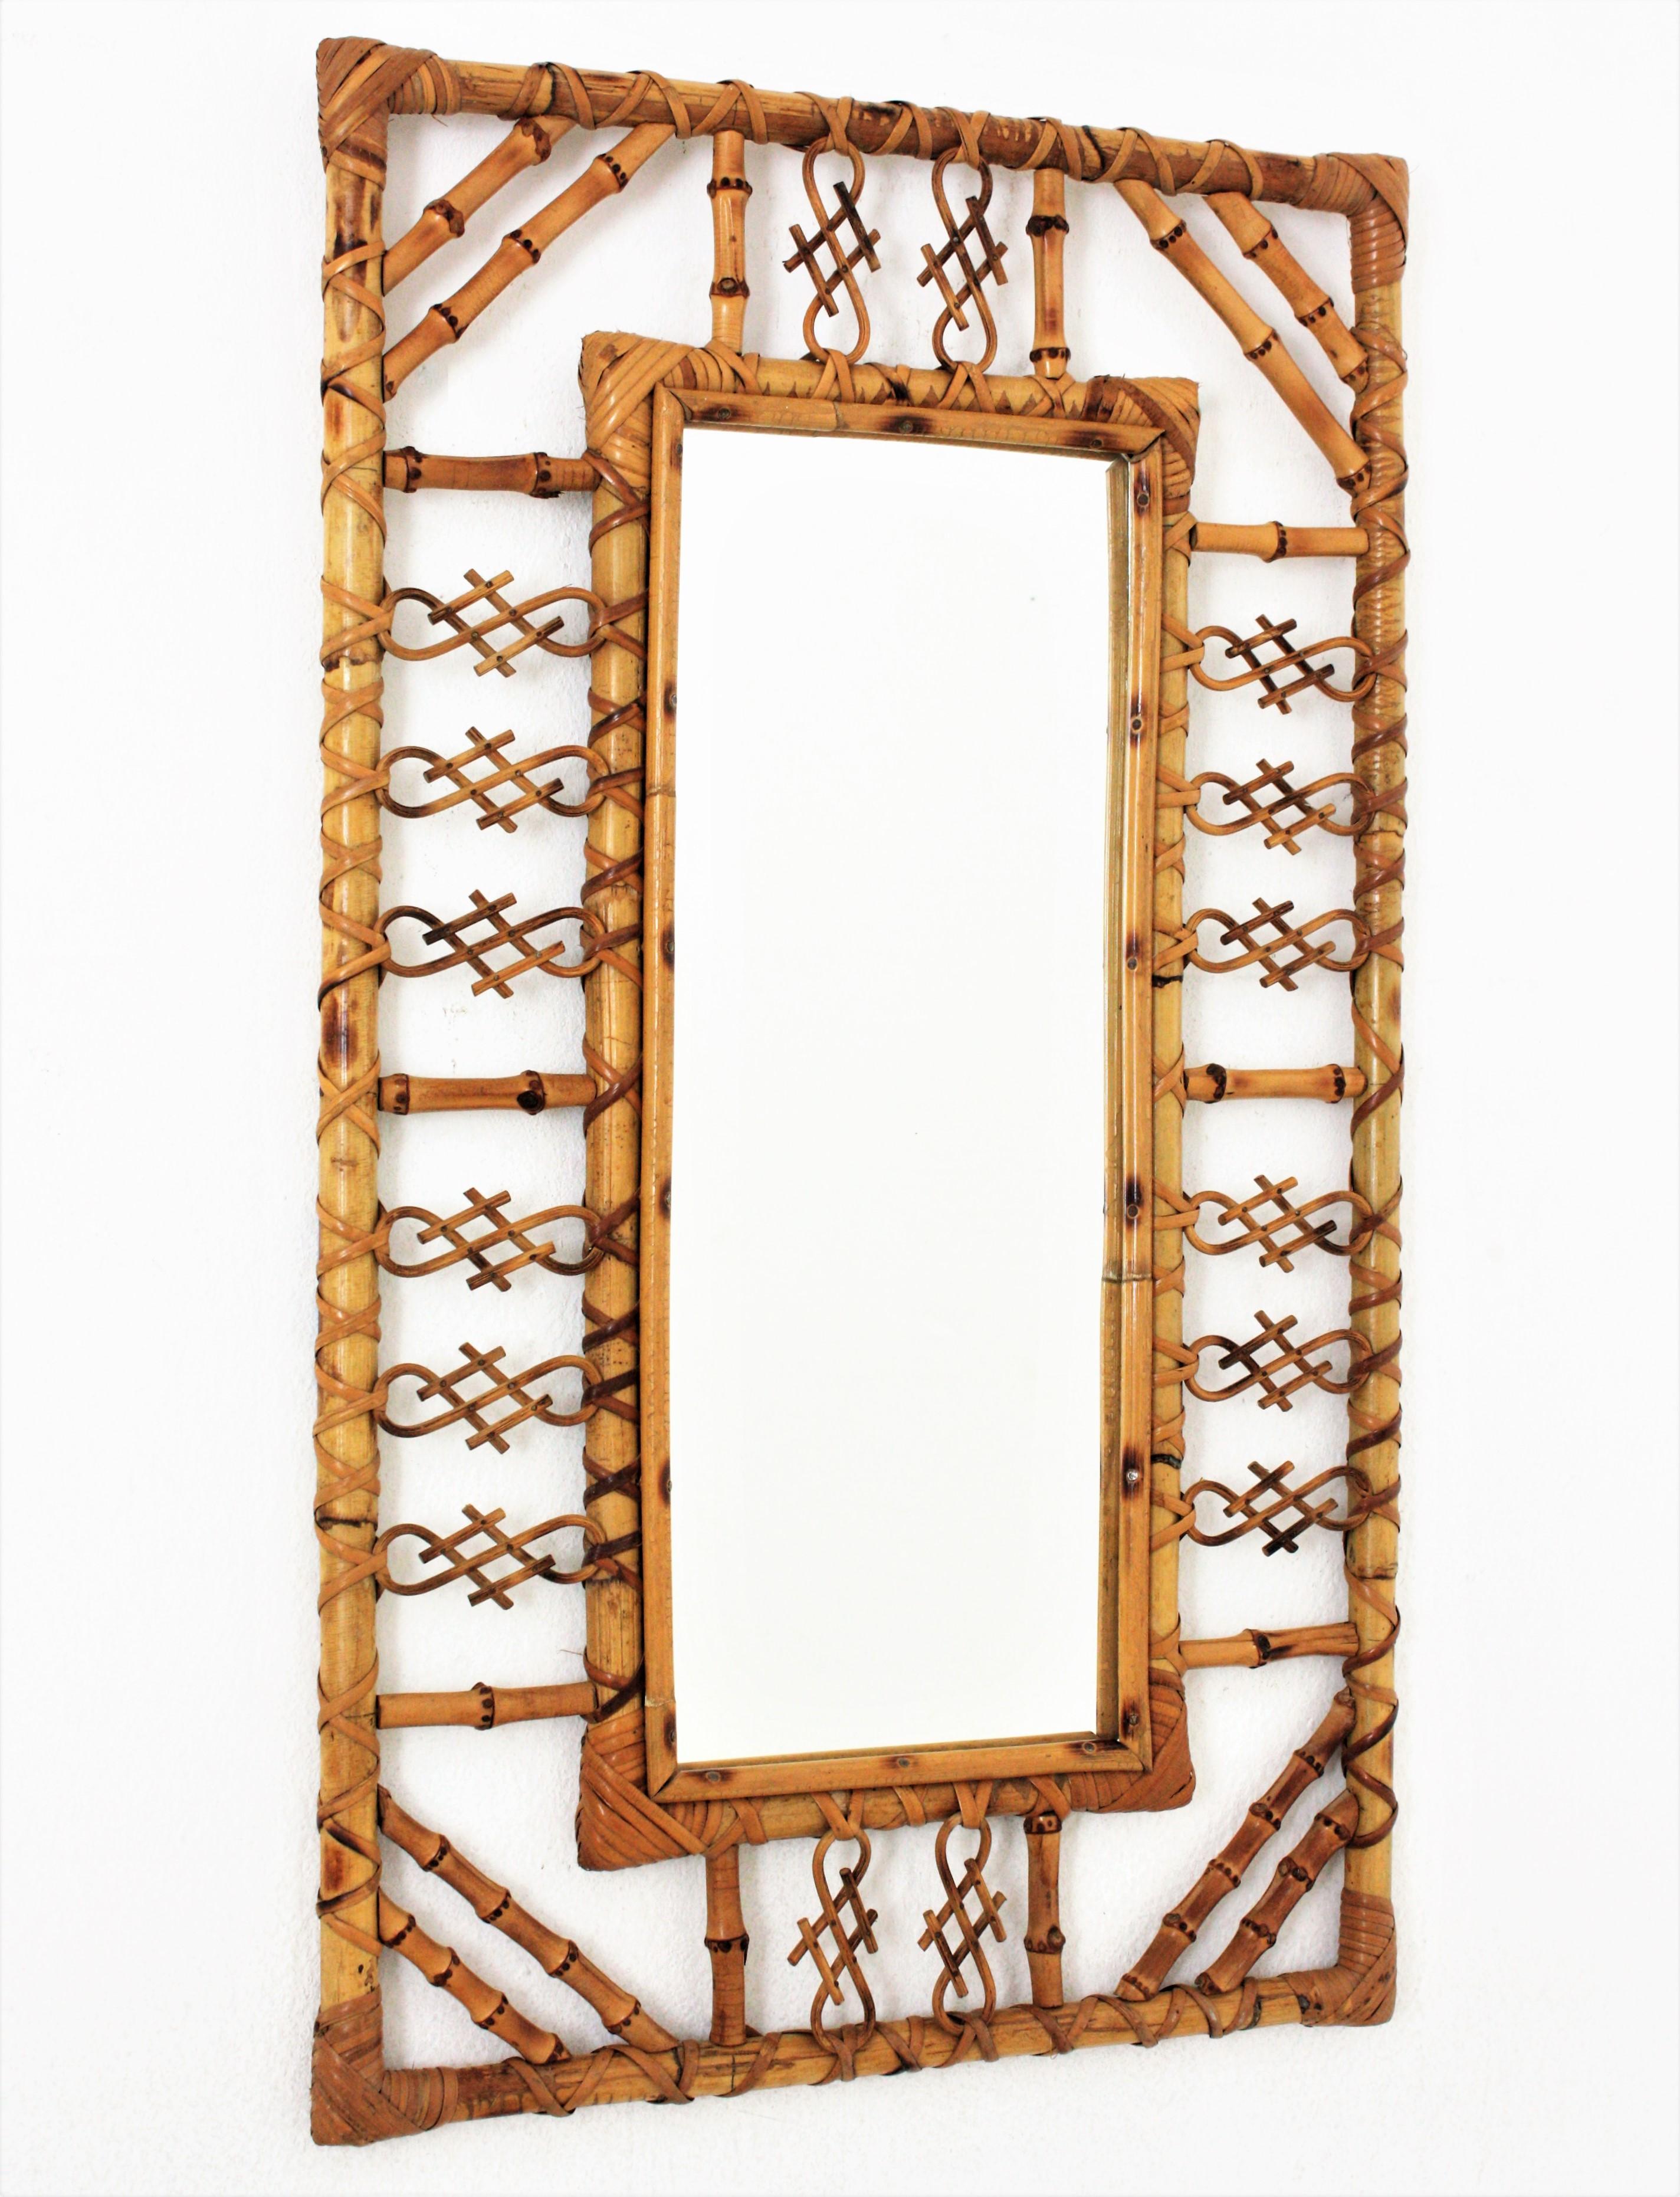 Midcentury rectangular mirror, rattan, bamboo. Spain, 1960s.
This handcrafed mirror has chinoiserie and bamboo decorations on the frame and joining the corners.
It will be eye-catching in an entry hall, bathroom or bedroom and it will add a